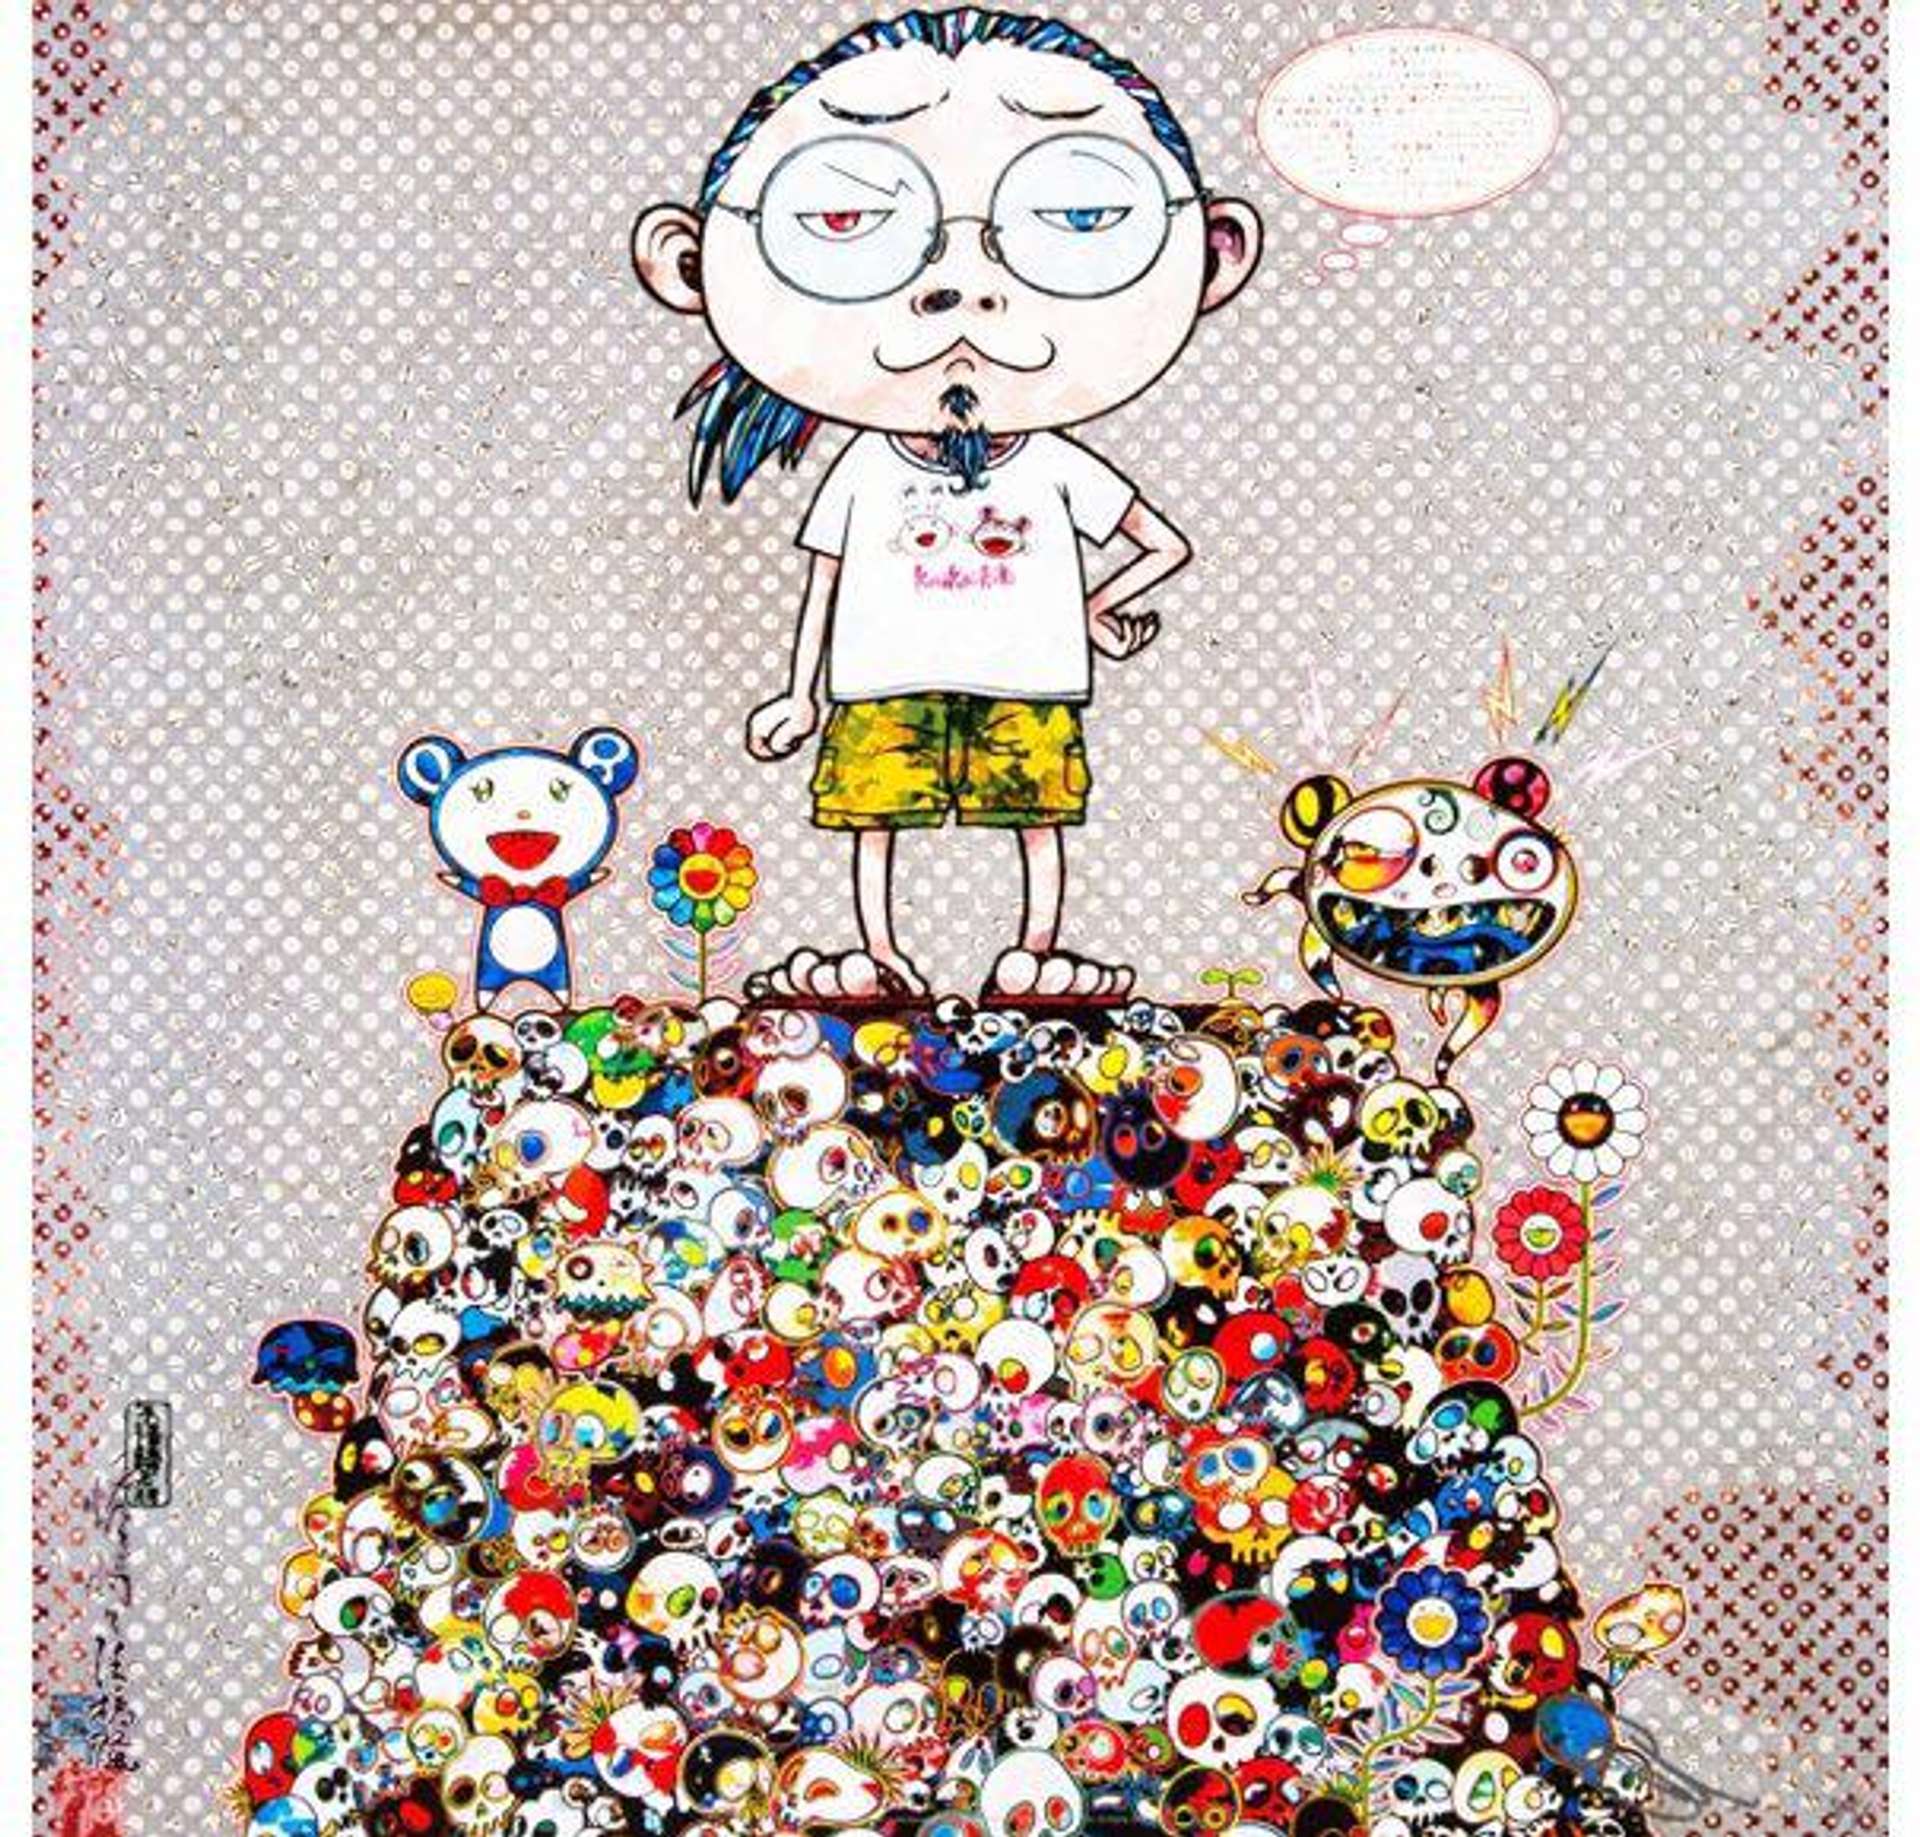 With the Notion of Death the Flowers Look Beautiful - Signed Print by Takashi Murakami 2013 - MyArtBroker